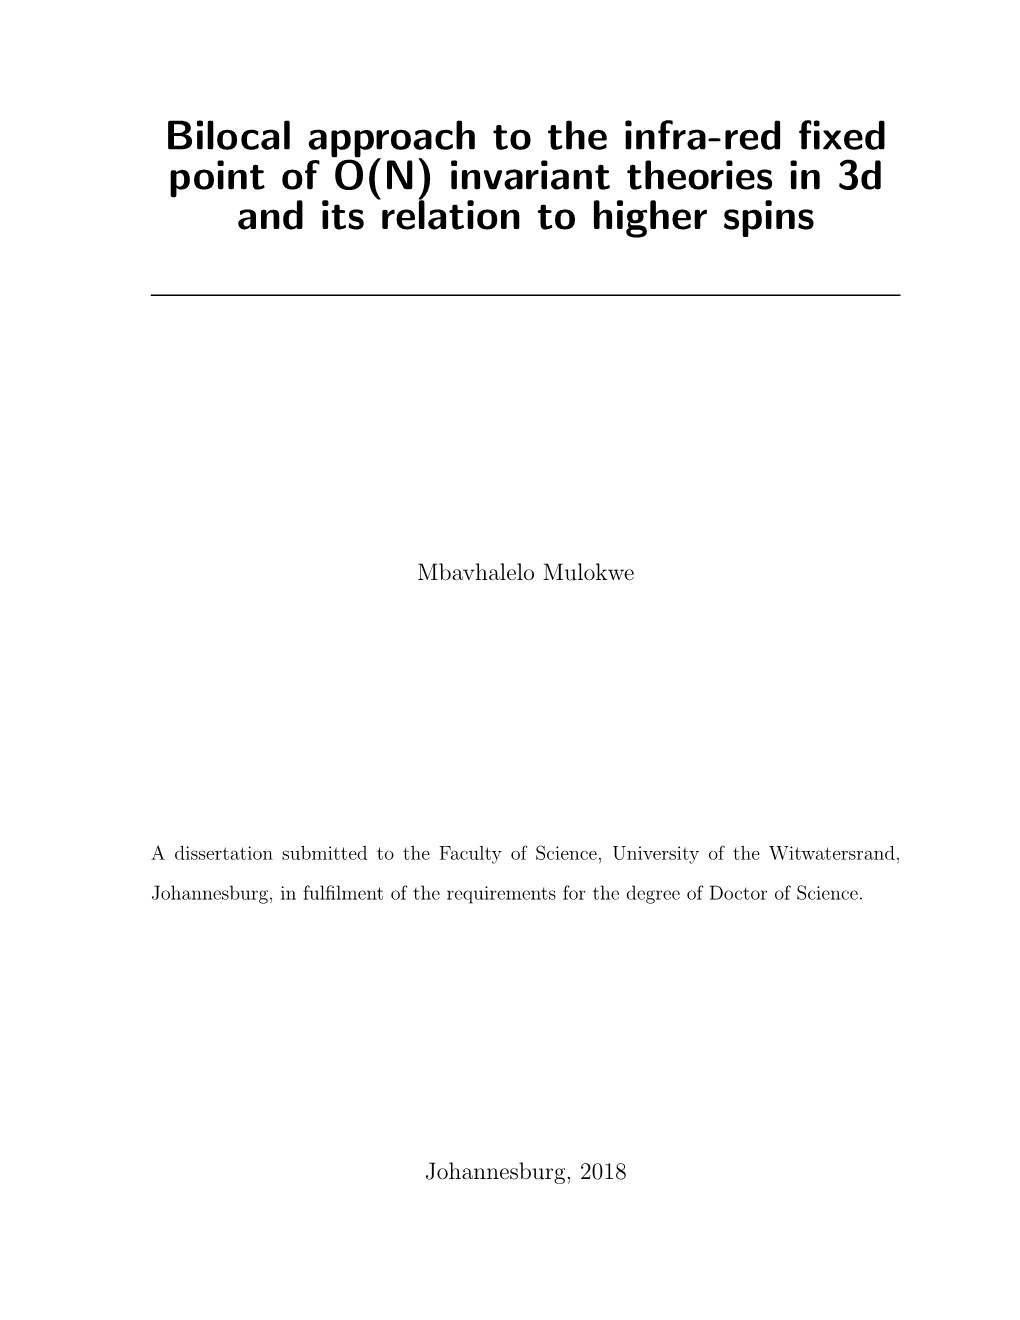 Bilocal Approach to the Infra-Red Fixed Point of O(N) Invariant Theories In